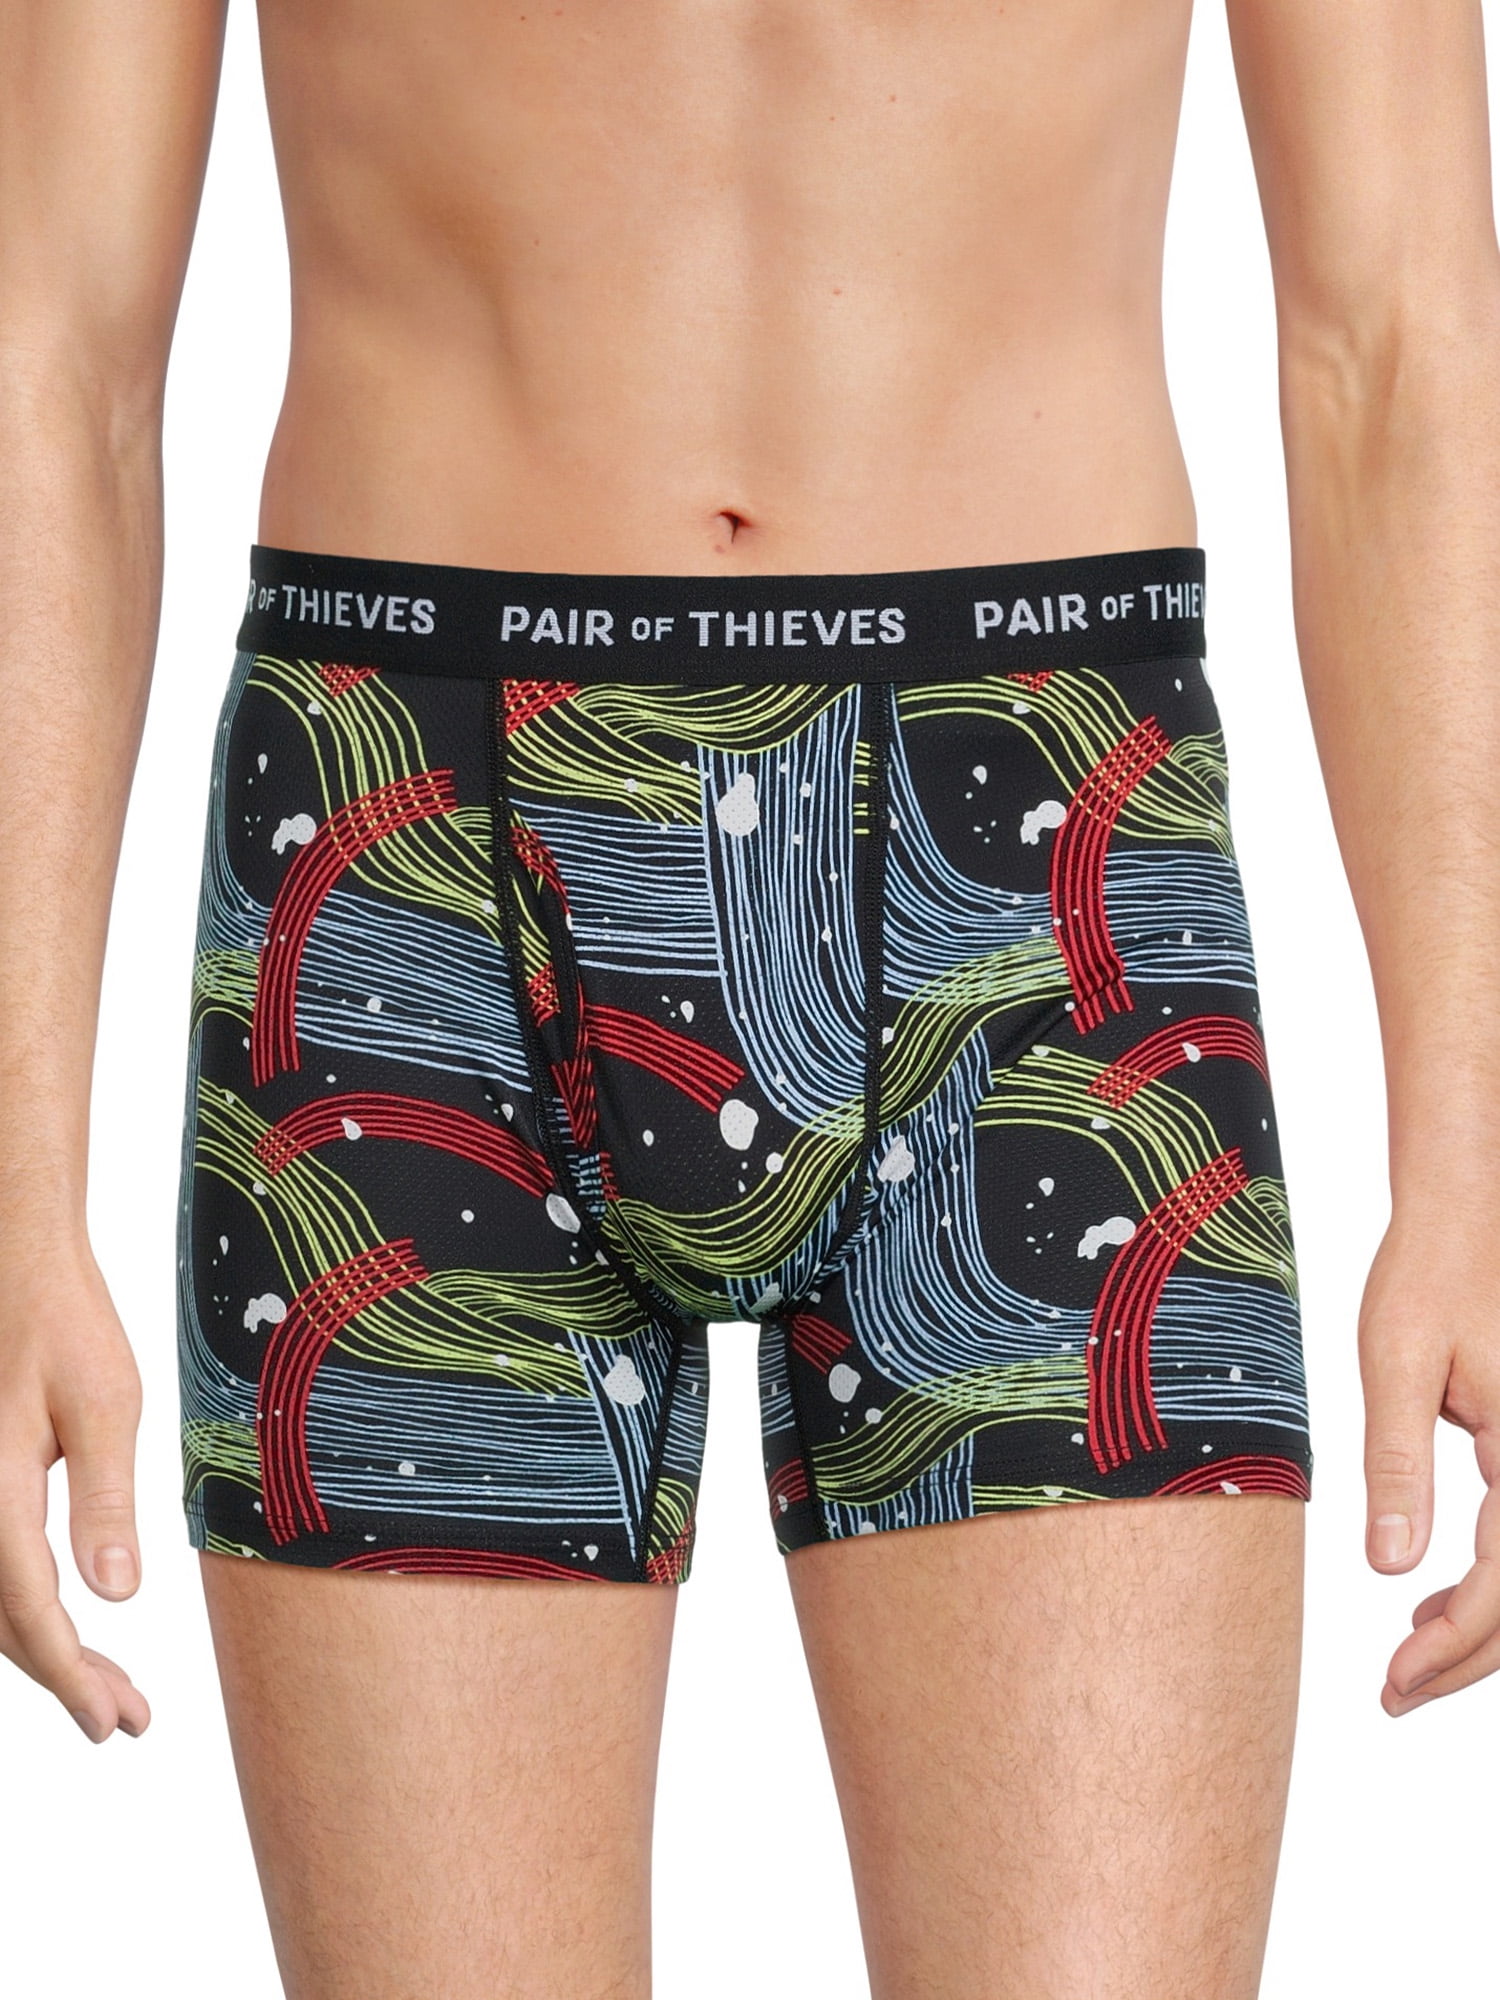 Pair of Thieves Men's SuperFit Angel Hair Boxer Briefs, 2-Pack, Sizes S-3XL  